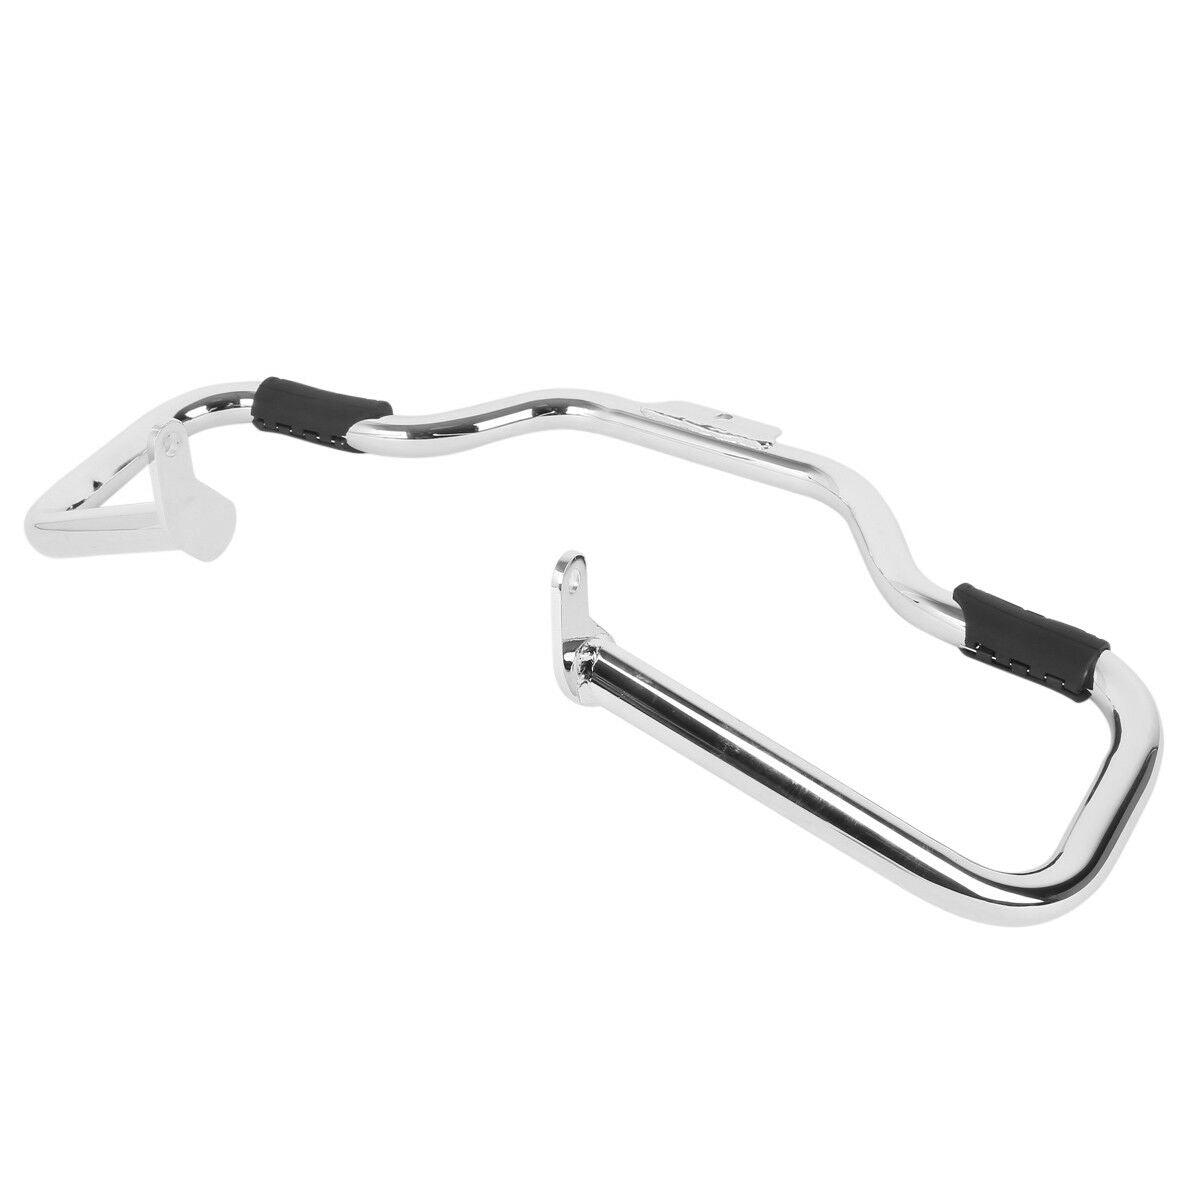 Chrome Engine Guard Bar Fit For Harley Heritage Softail FLSTC FLSTF 2000-2017 - Moto Life Products